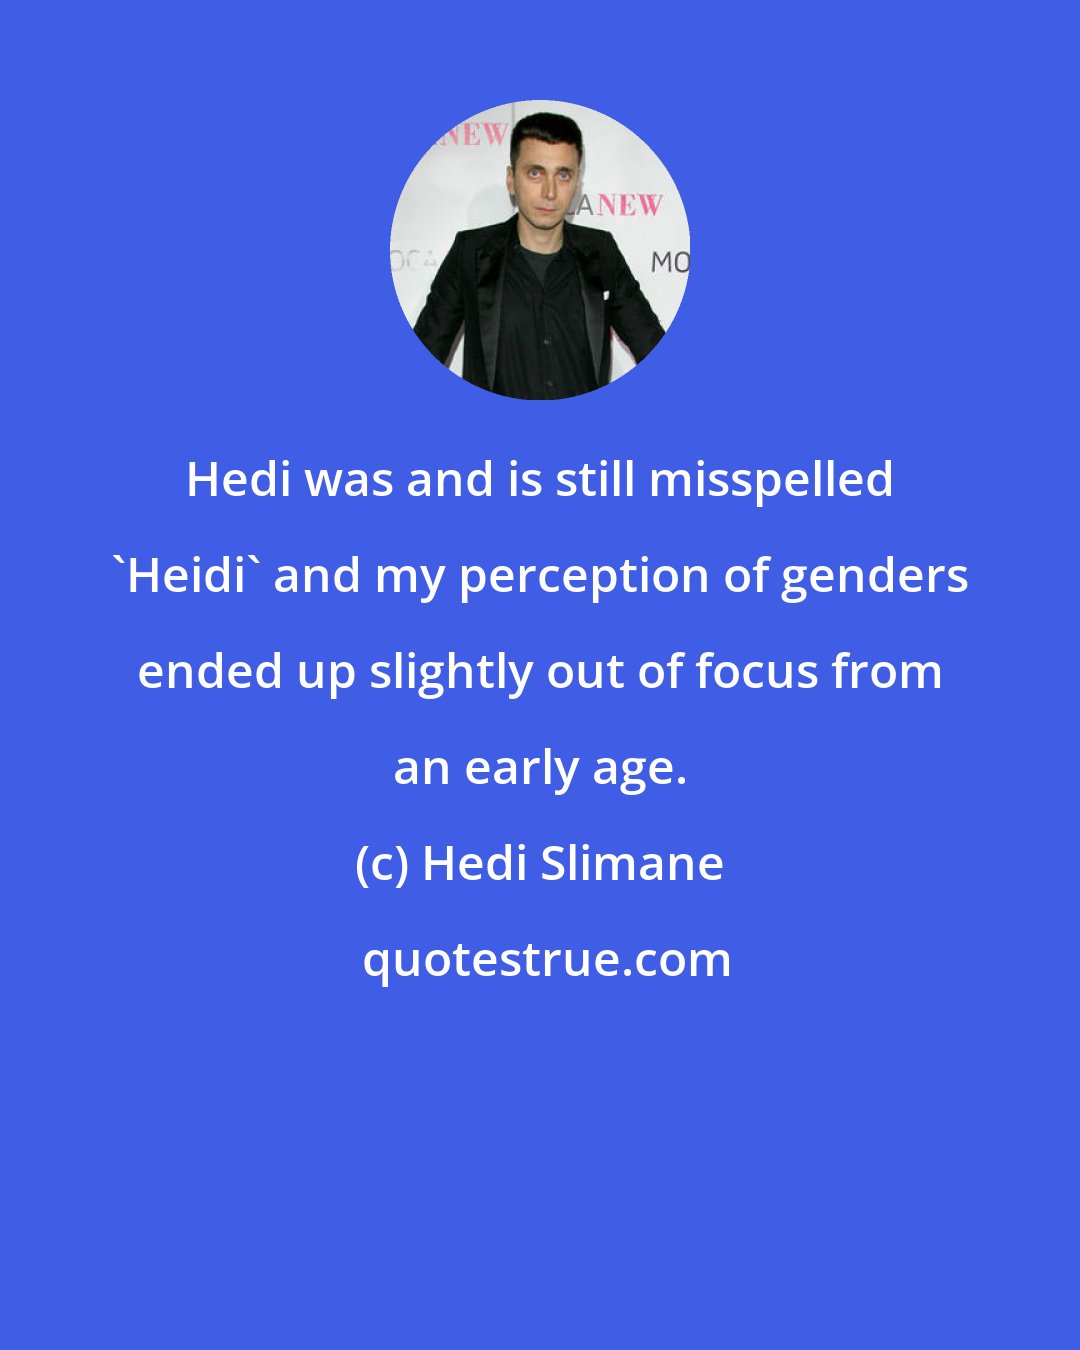 Hedi Slimane: Hedi was and is still misspelled 'Heidi' and my perception of genders ended up slightly out of focus from an early age.